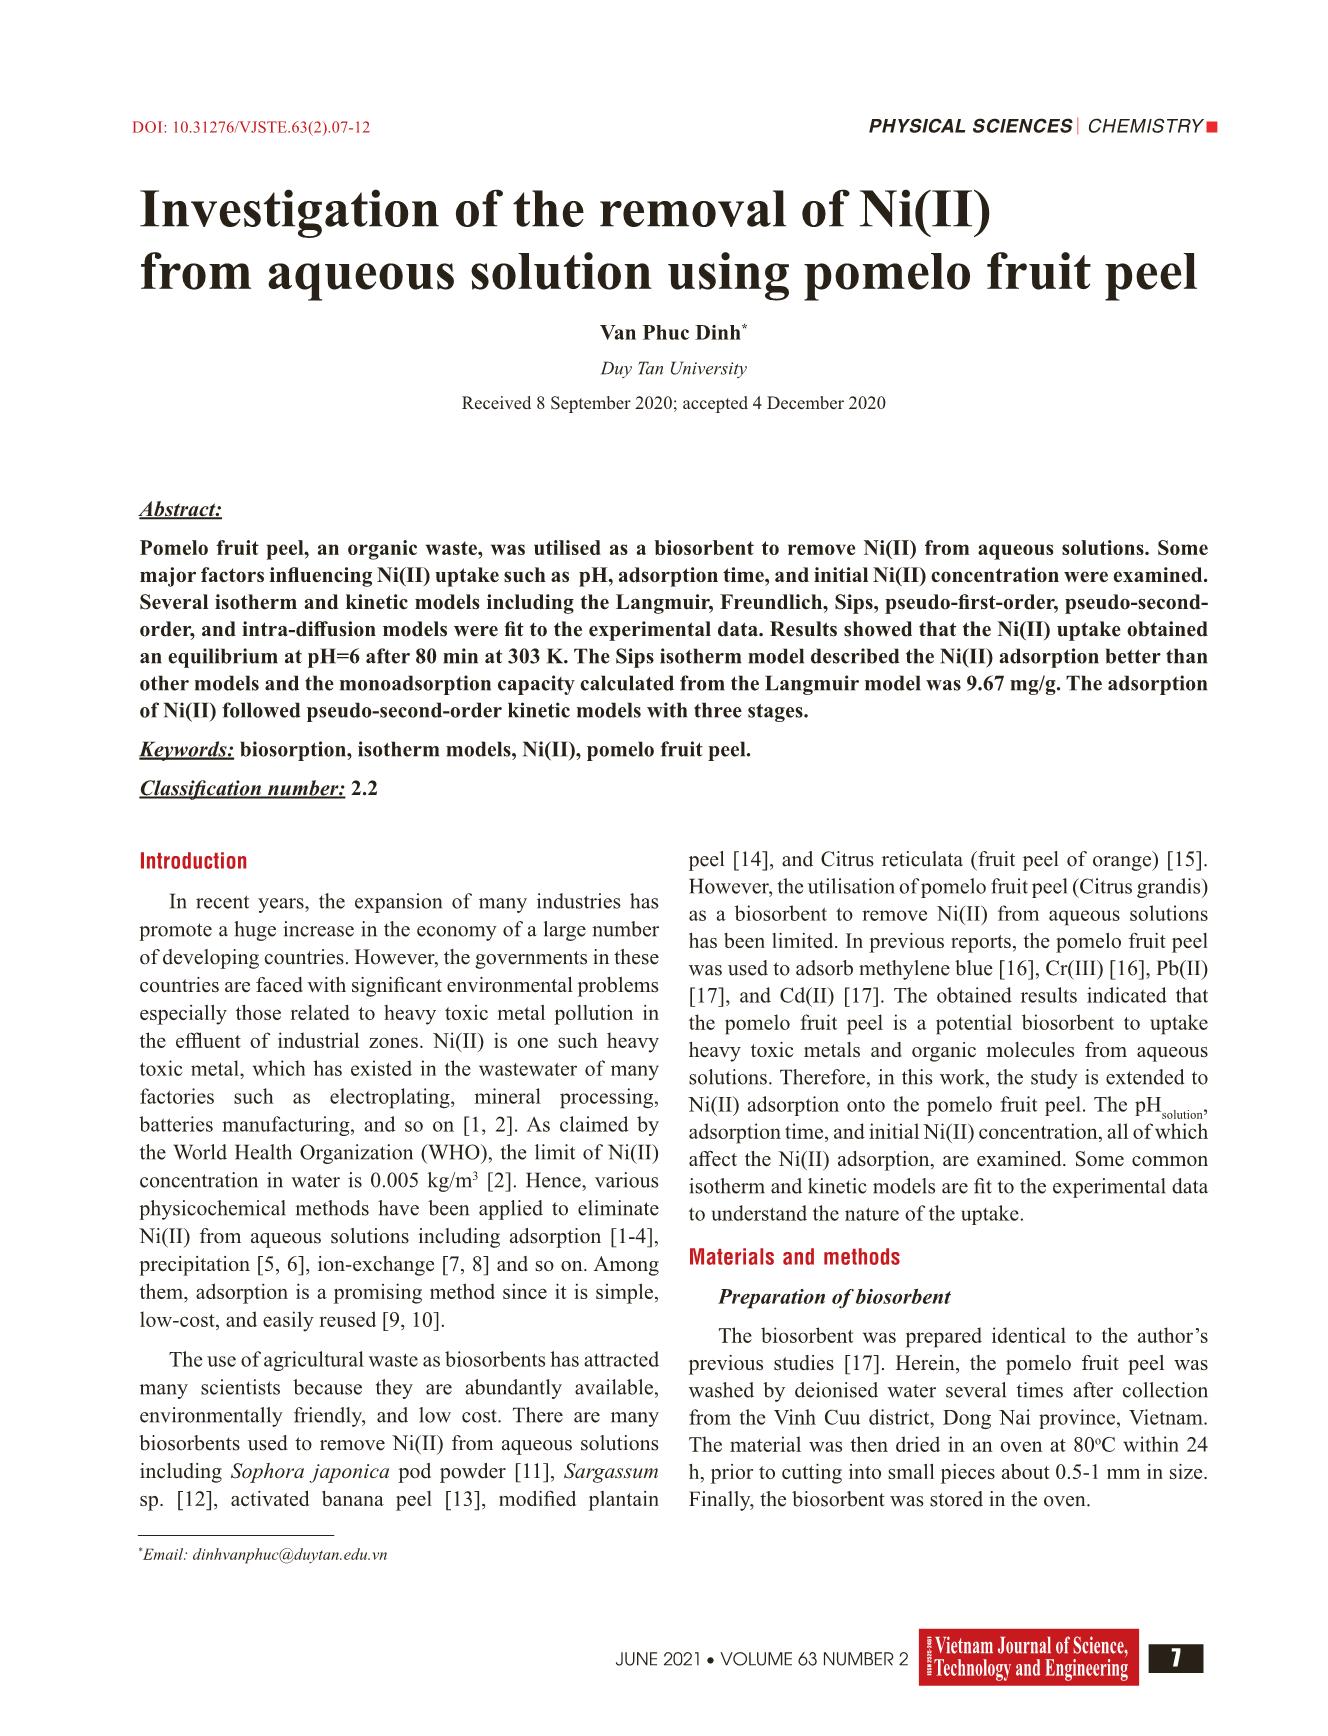 Investigation of the removal of Ni(II) from aqueous solution using pomelo fruit peel trang 1